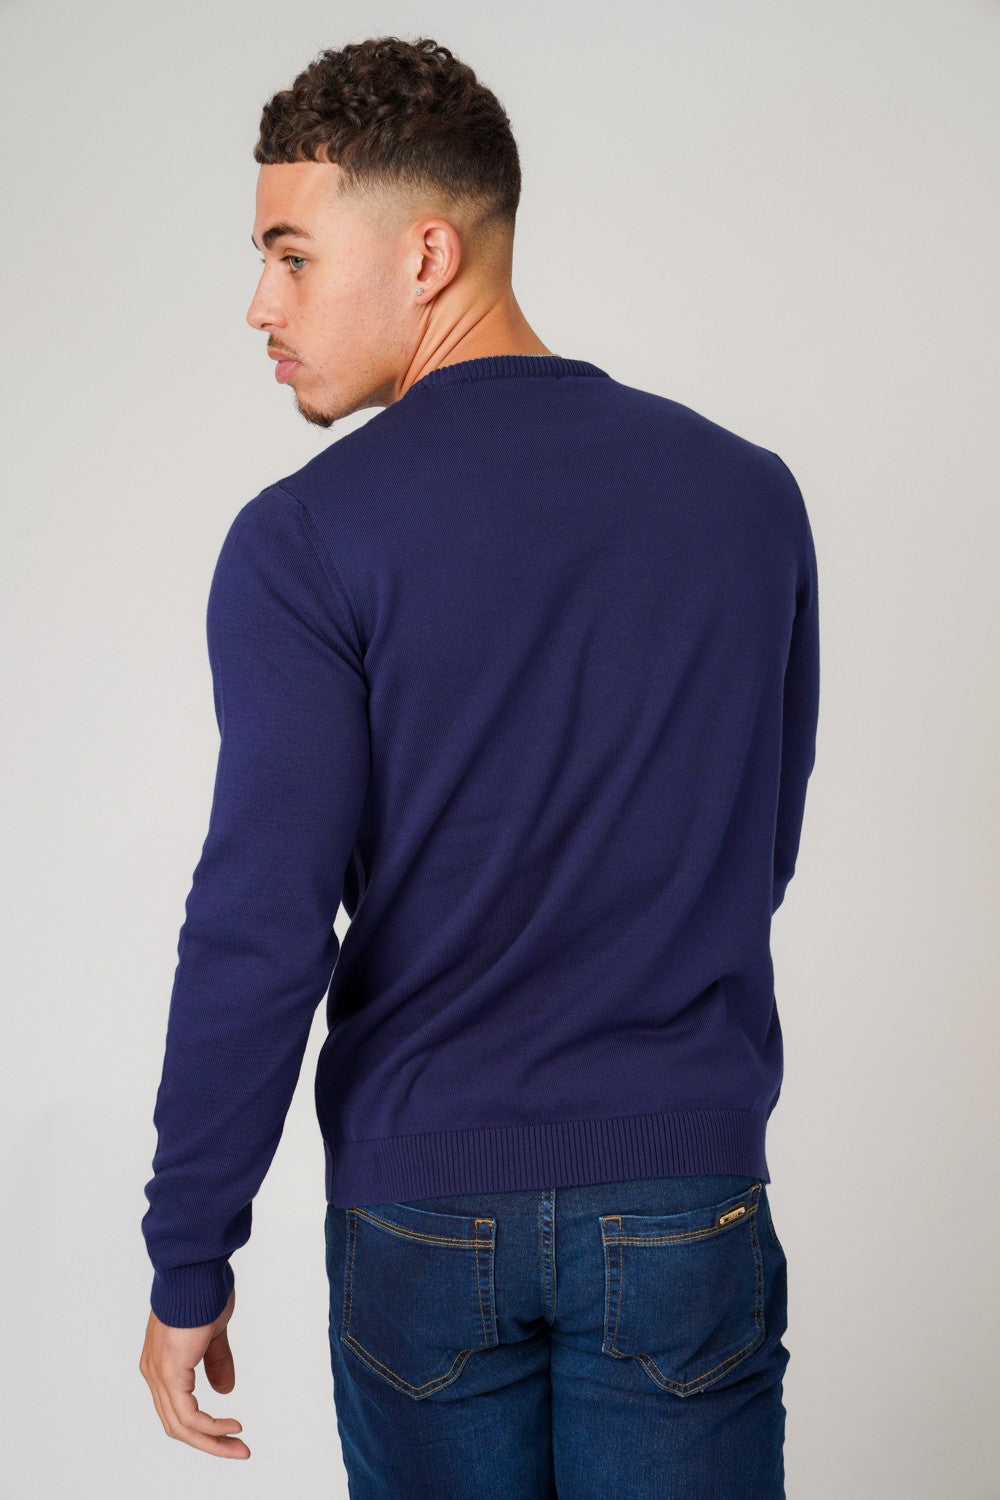 DJ KNITWEAR NAVY AND SILVER - Don Jeans